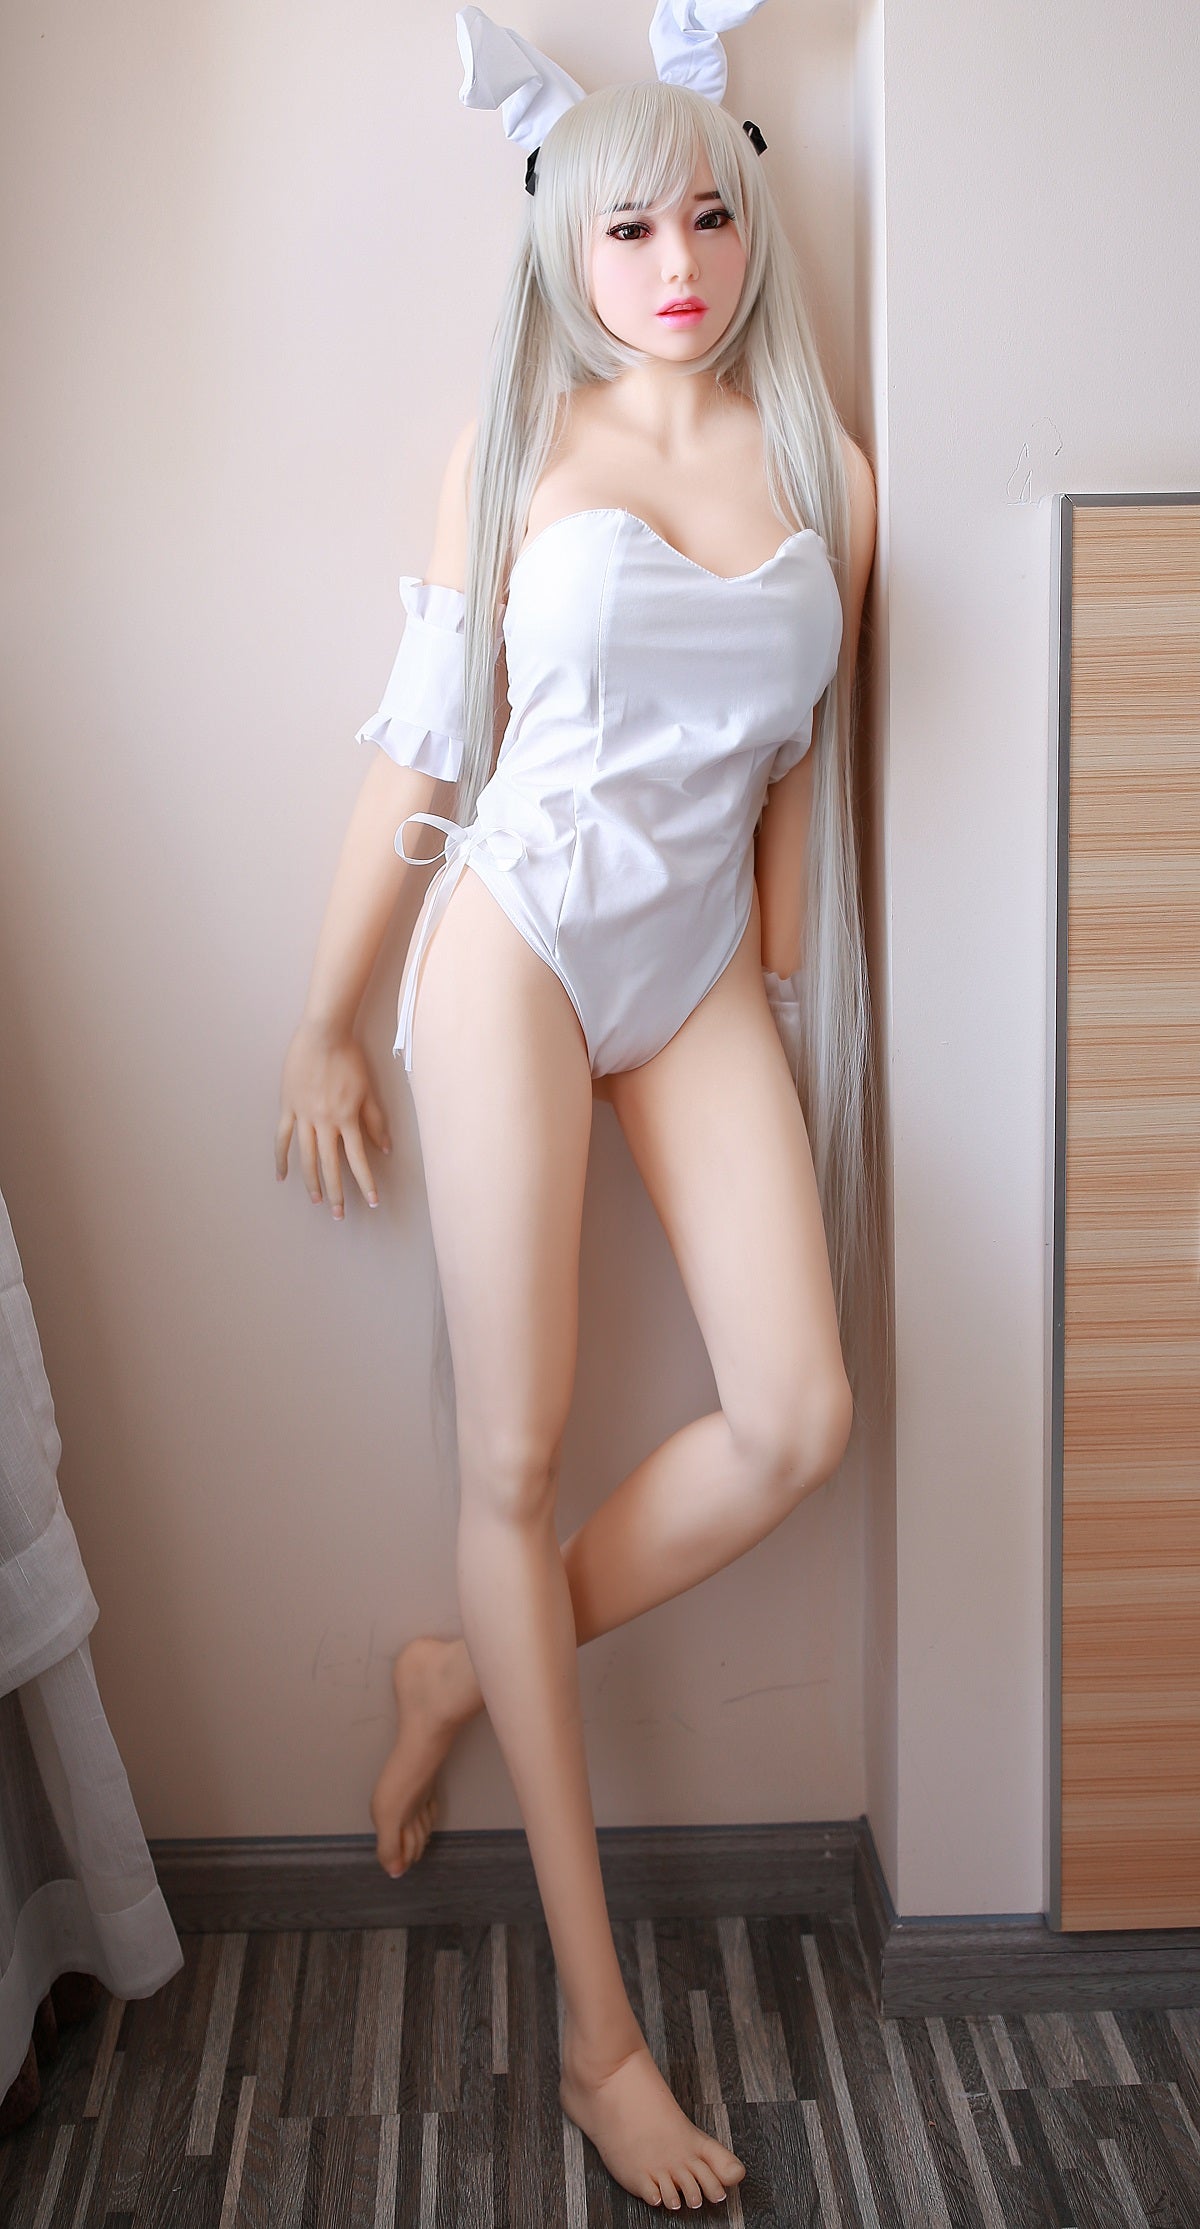 US Stock - Bernice 158cm #33 Big Breasts Super Sexy TPE Love Doll Jelly Breasts Sex Doll